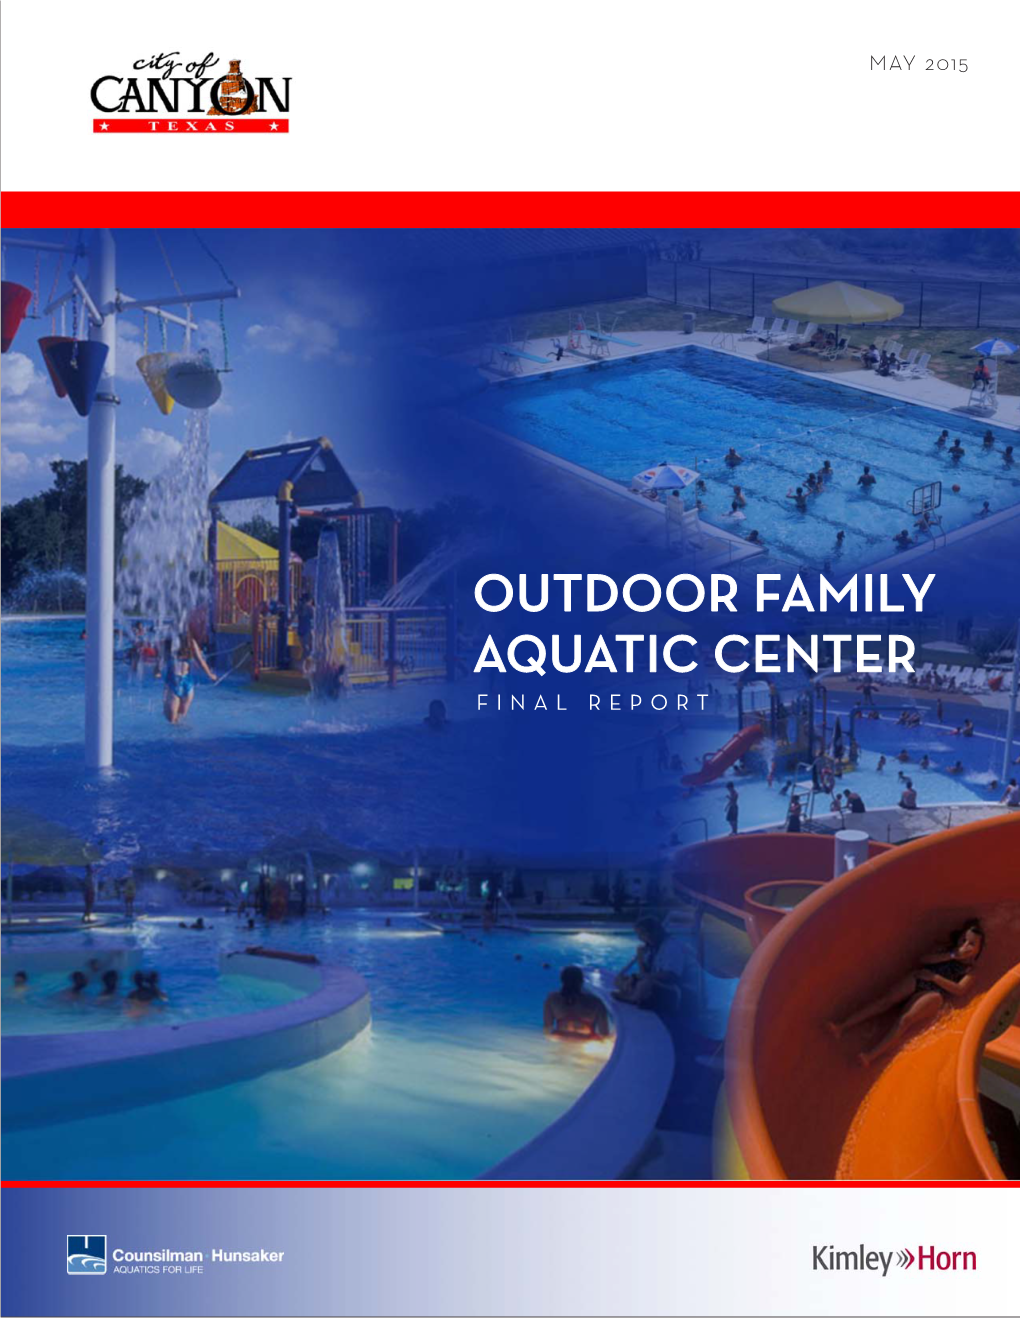 Outdoor Family Aquatic Center Final Report May 2015